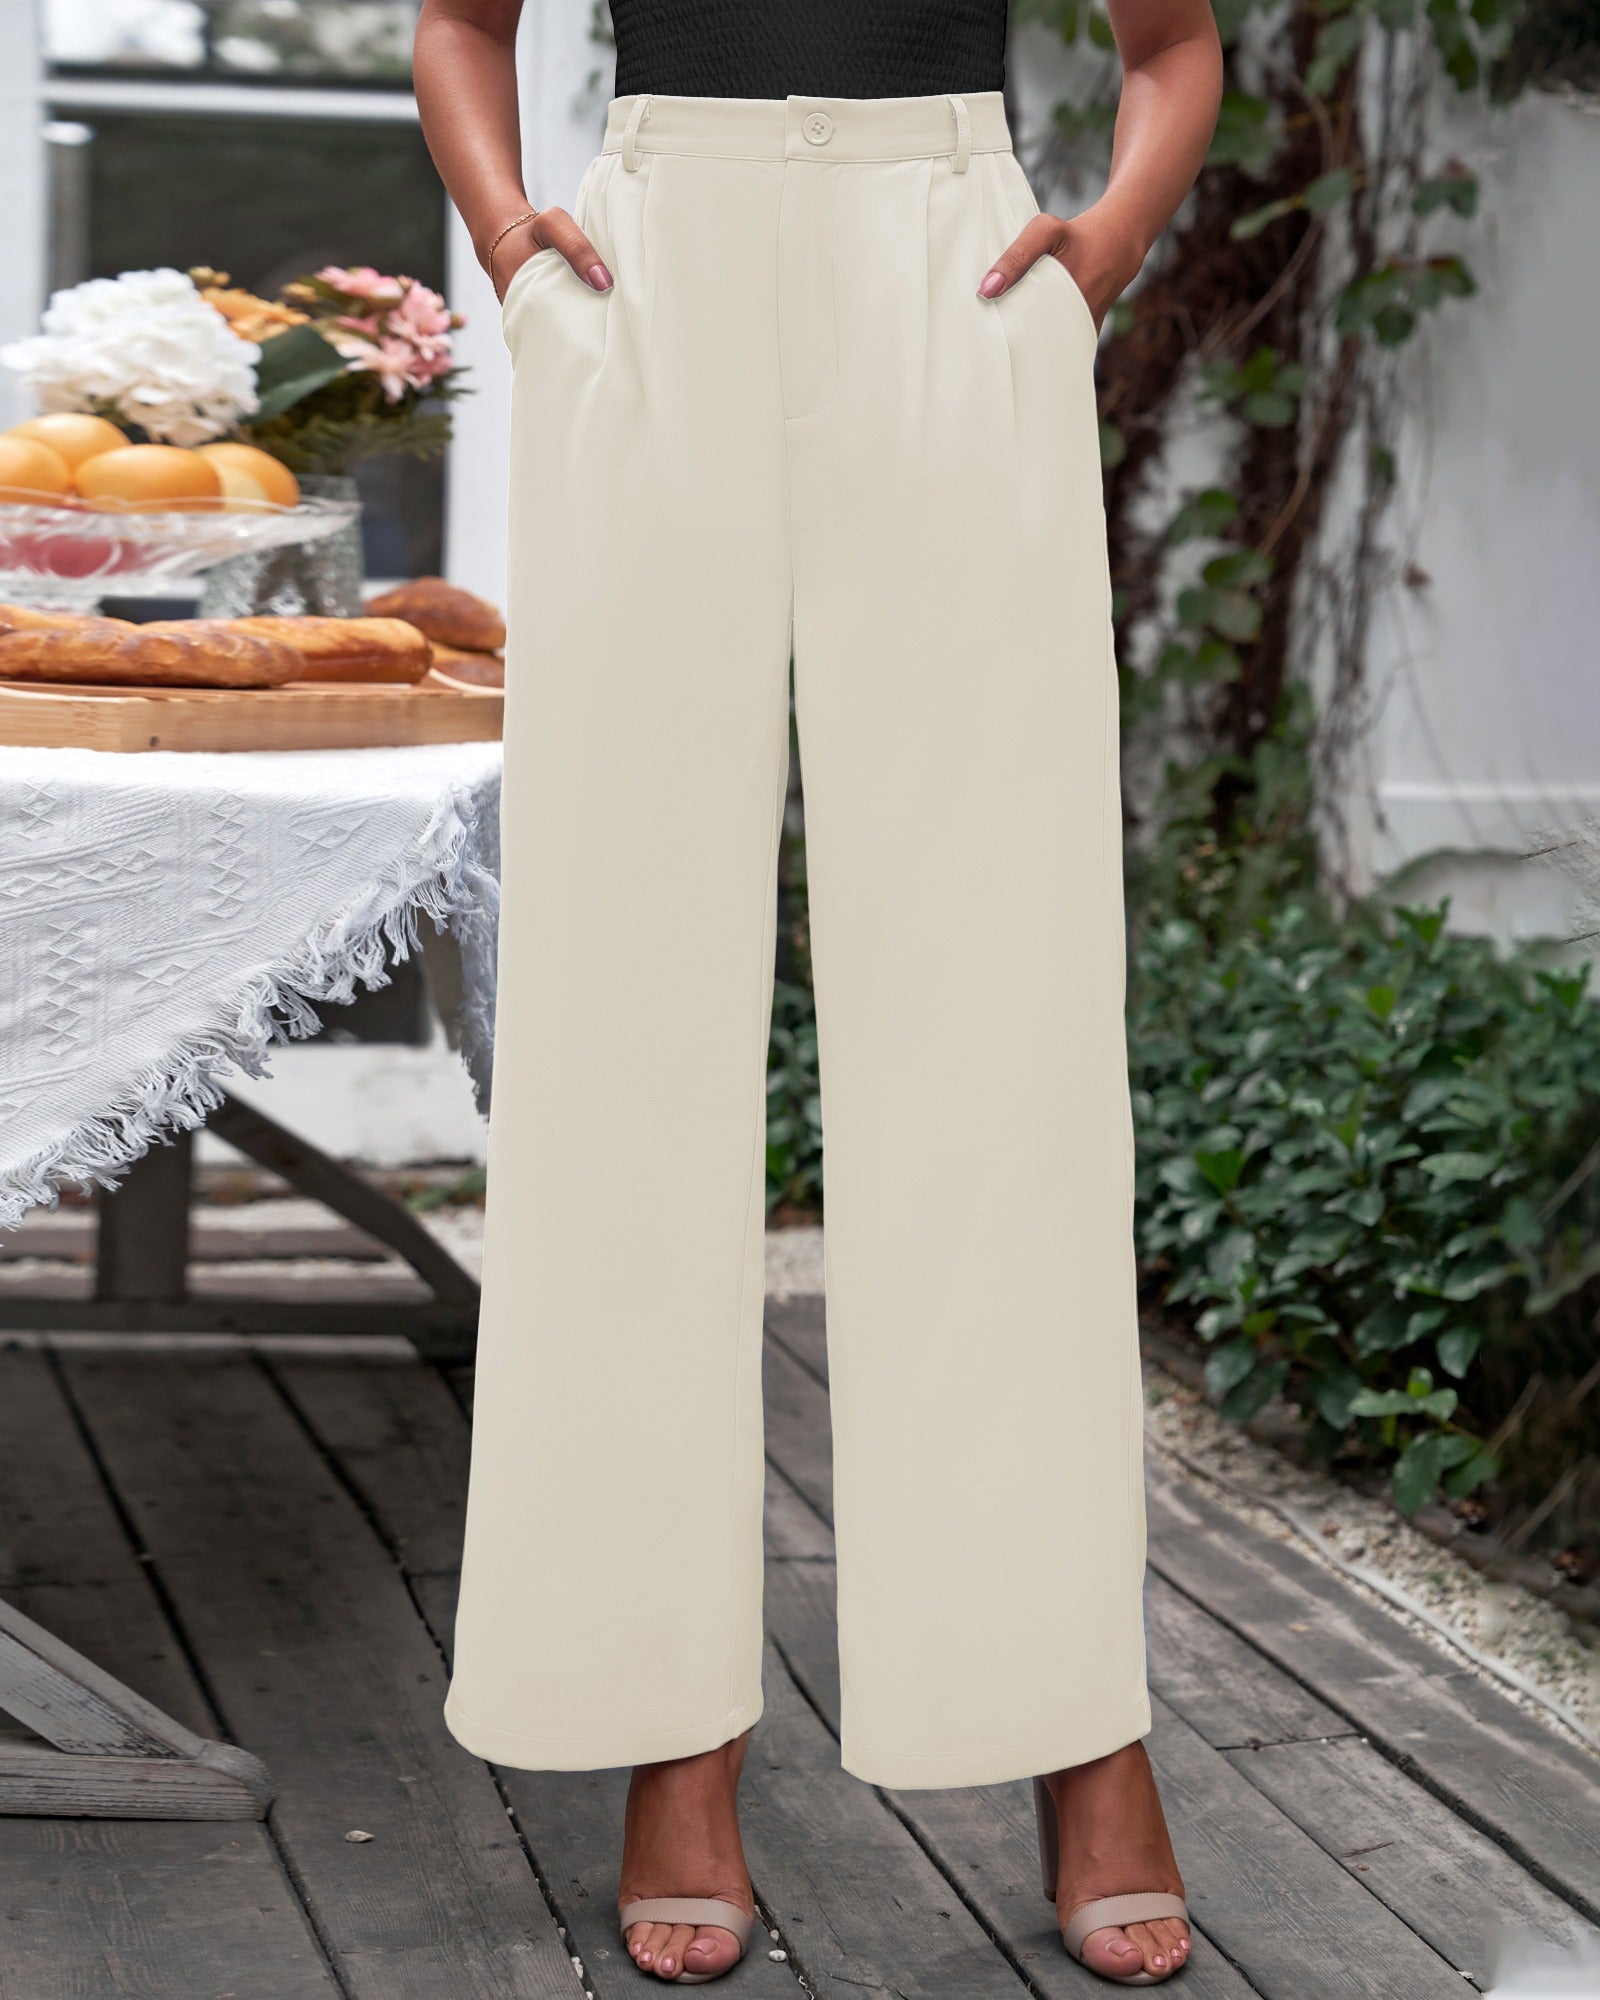 Office Chic: How to Wear Palazzo Pants to Work - Chiconomical